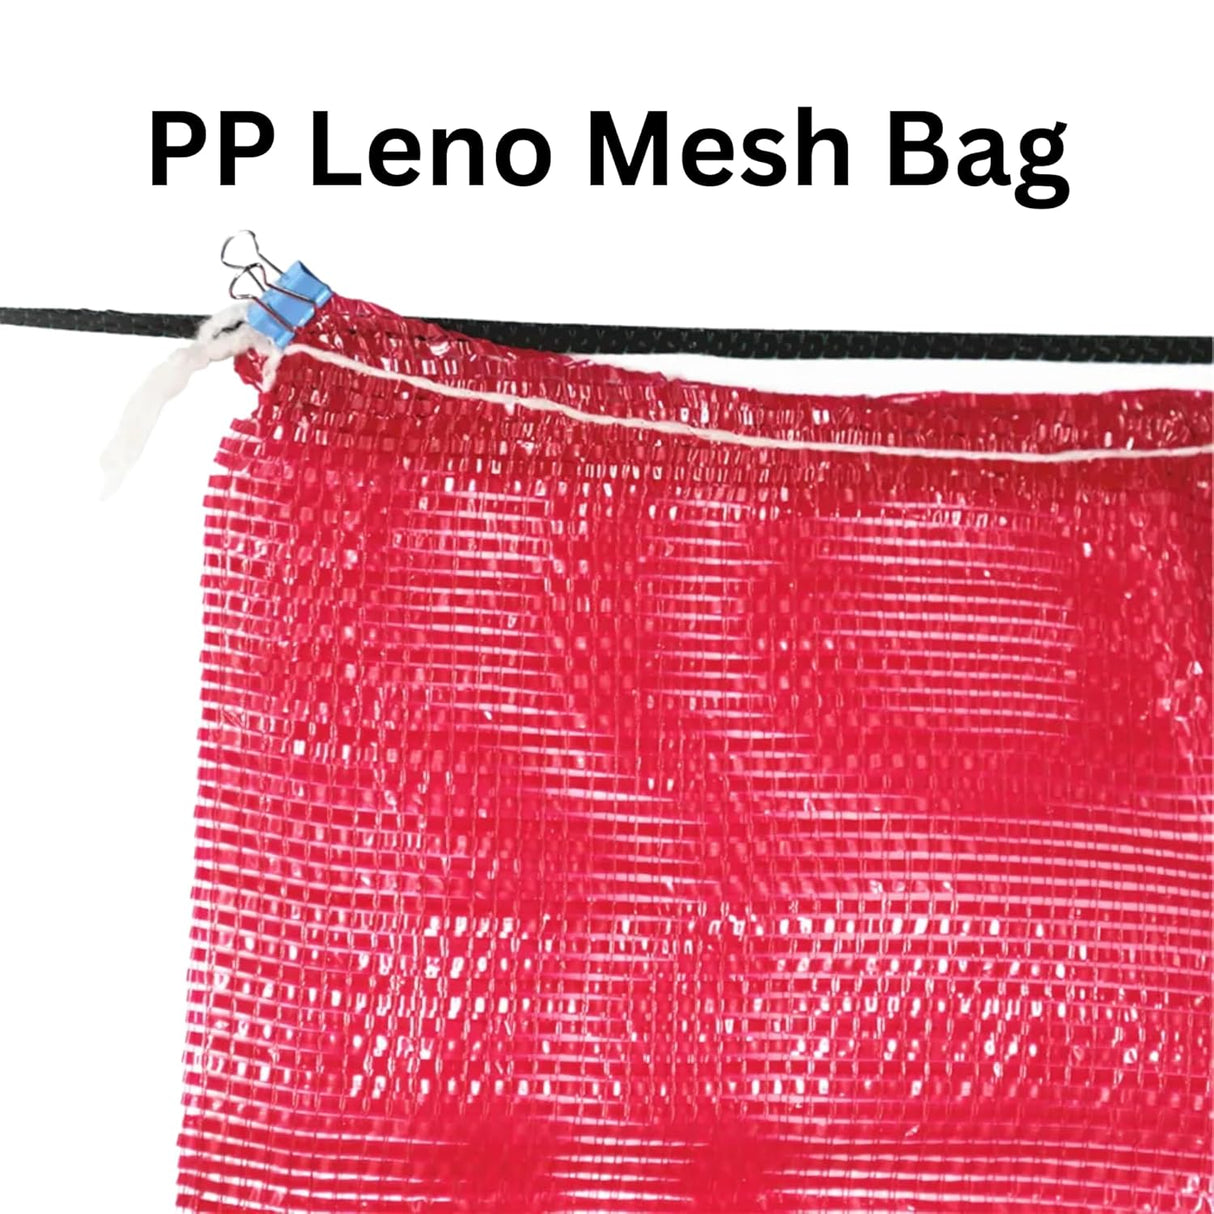 SINGHAL Leno Mesh Storage Produce Bags Reusable for Vegetable Storage Bags Onion Storage Washable Net Bags (22x40 Inch - Orange, 50)